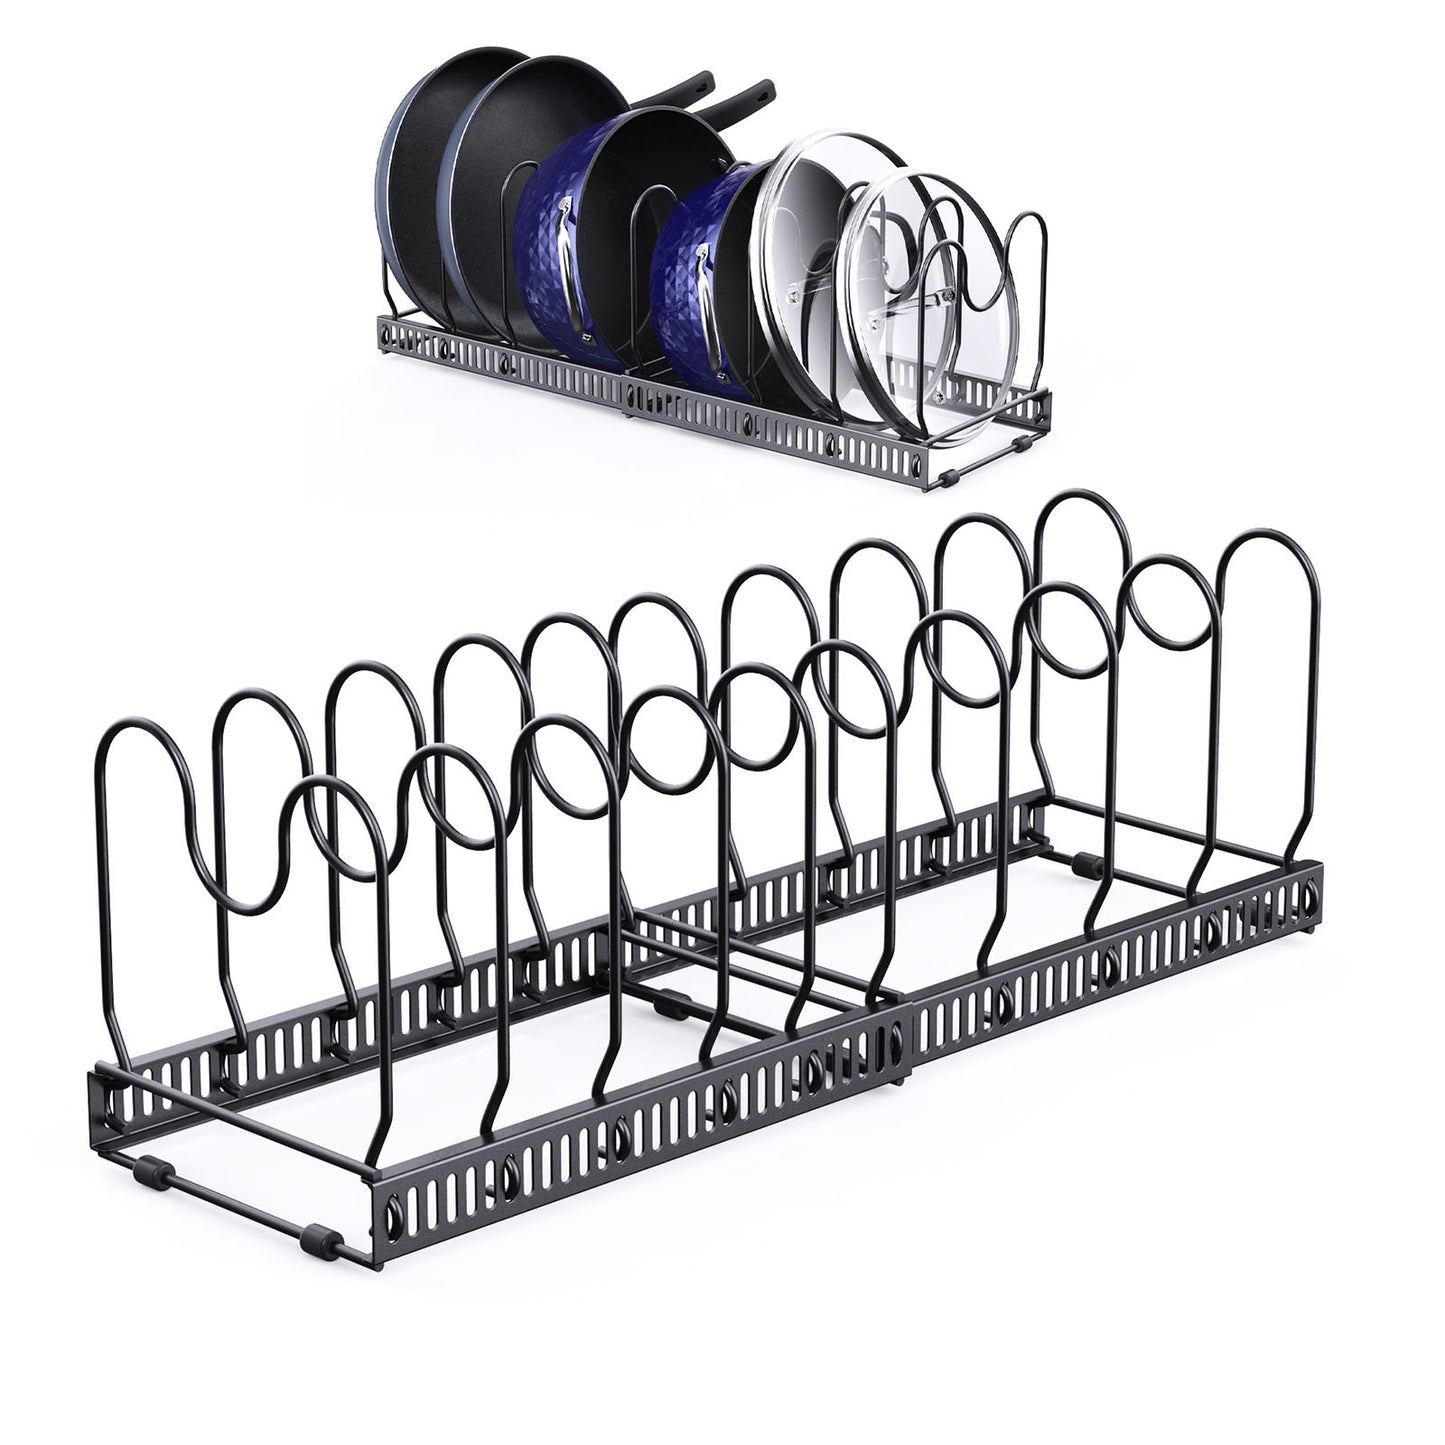 Expandable Pans Organiser Rack,Pot And Pan Lid Holder With 10 Adjustable Dividers,Bakeware Saucepan Lid Storage For Kitchen Cupboard, Black